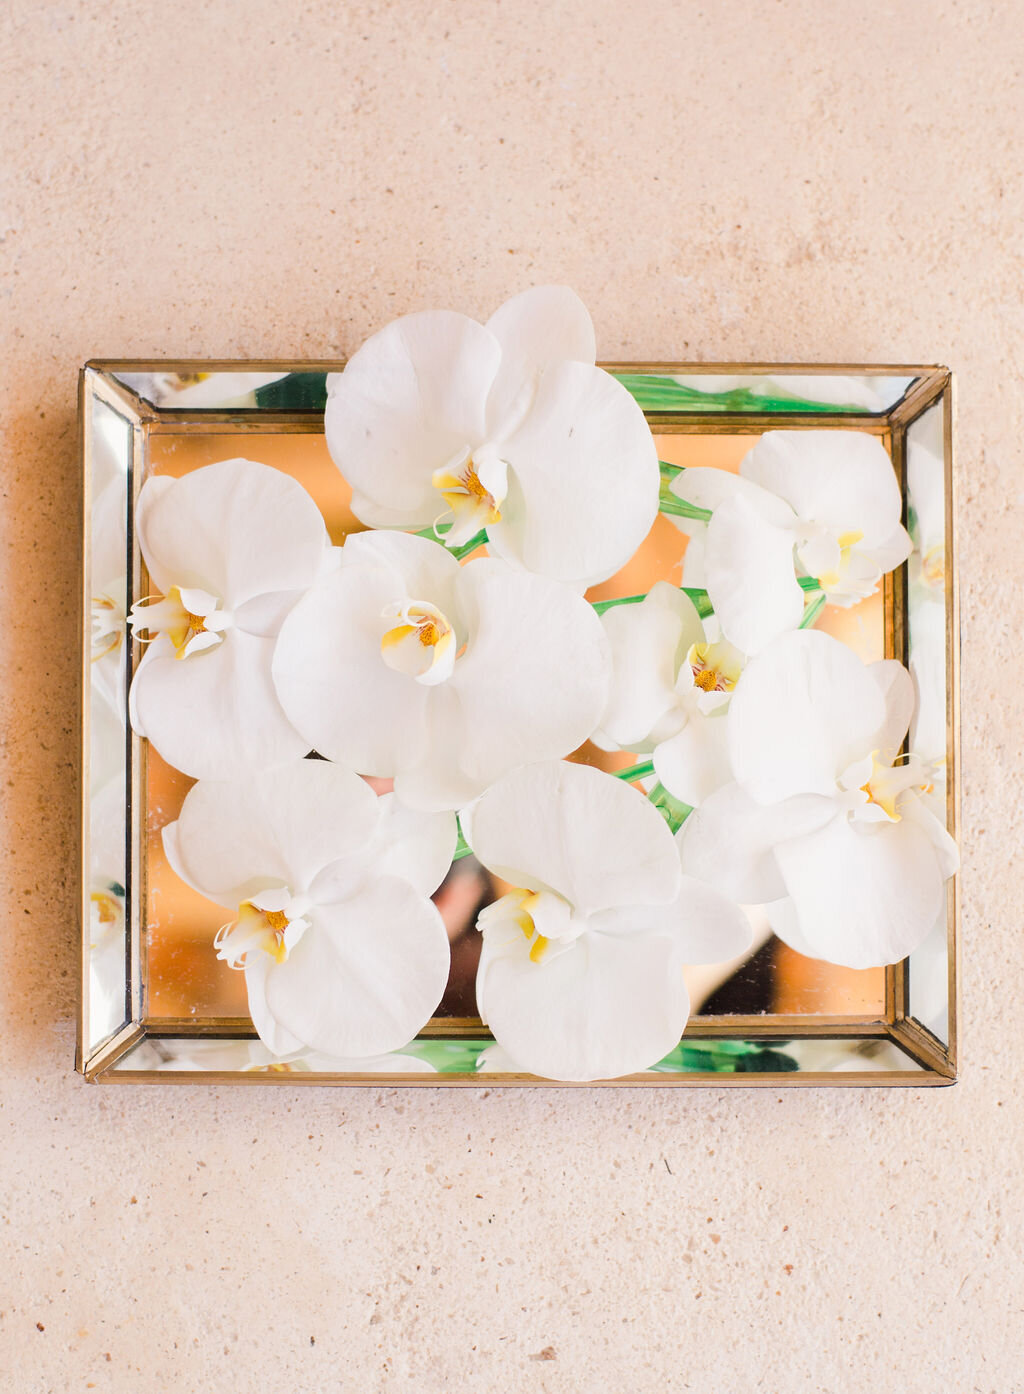 white flowers on a tray for Destination wedding at Hotel Esencia in Tulum Mexico